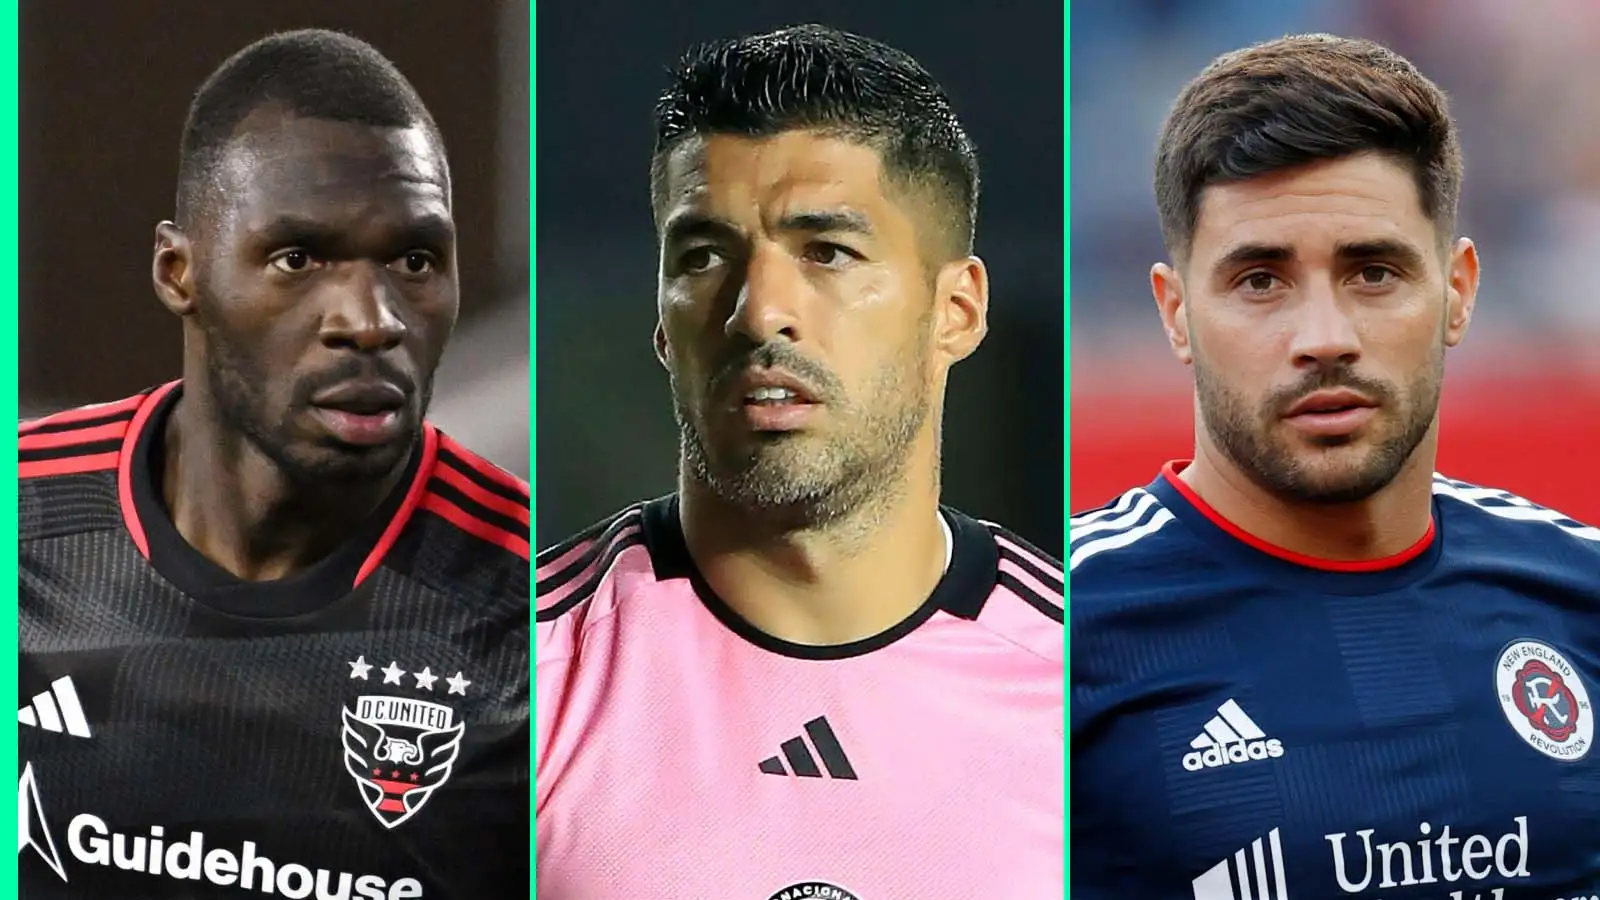 Liverpool icon and USMNT star among 6 former Premier League players thriving in MLS